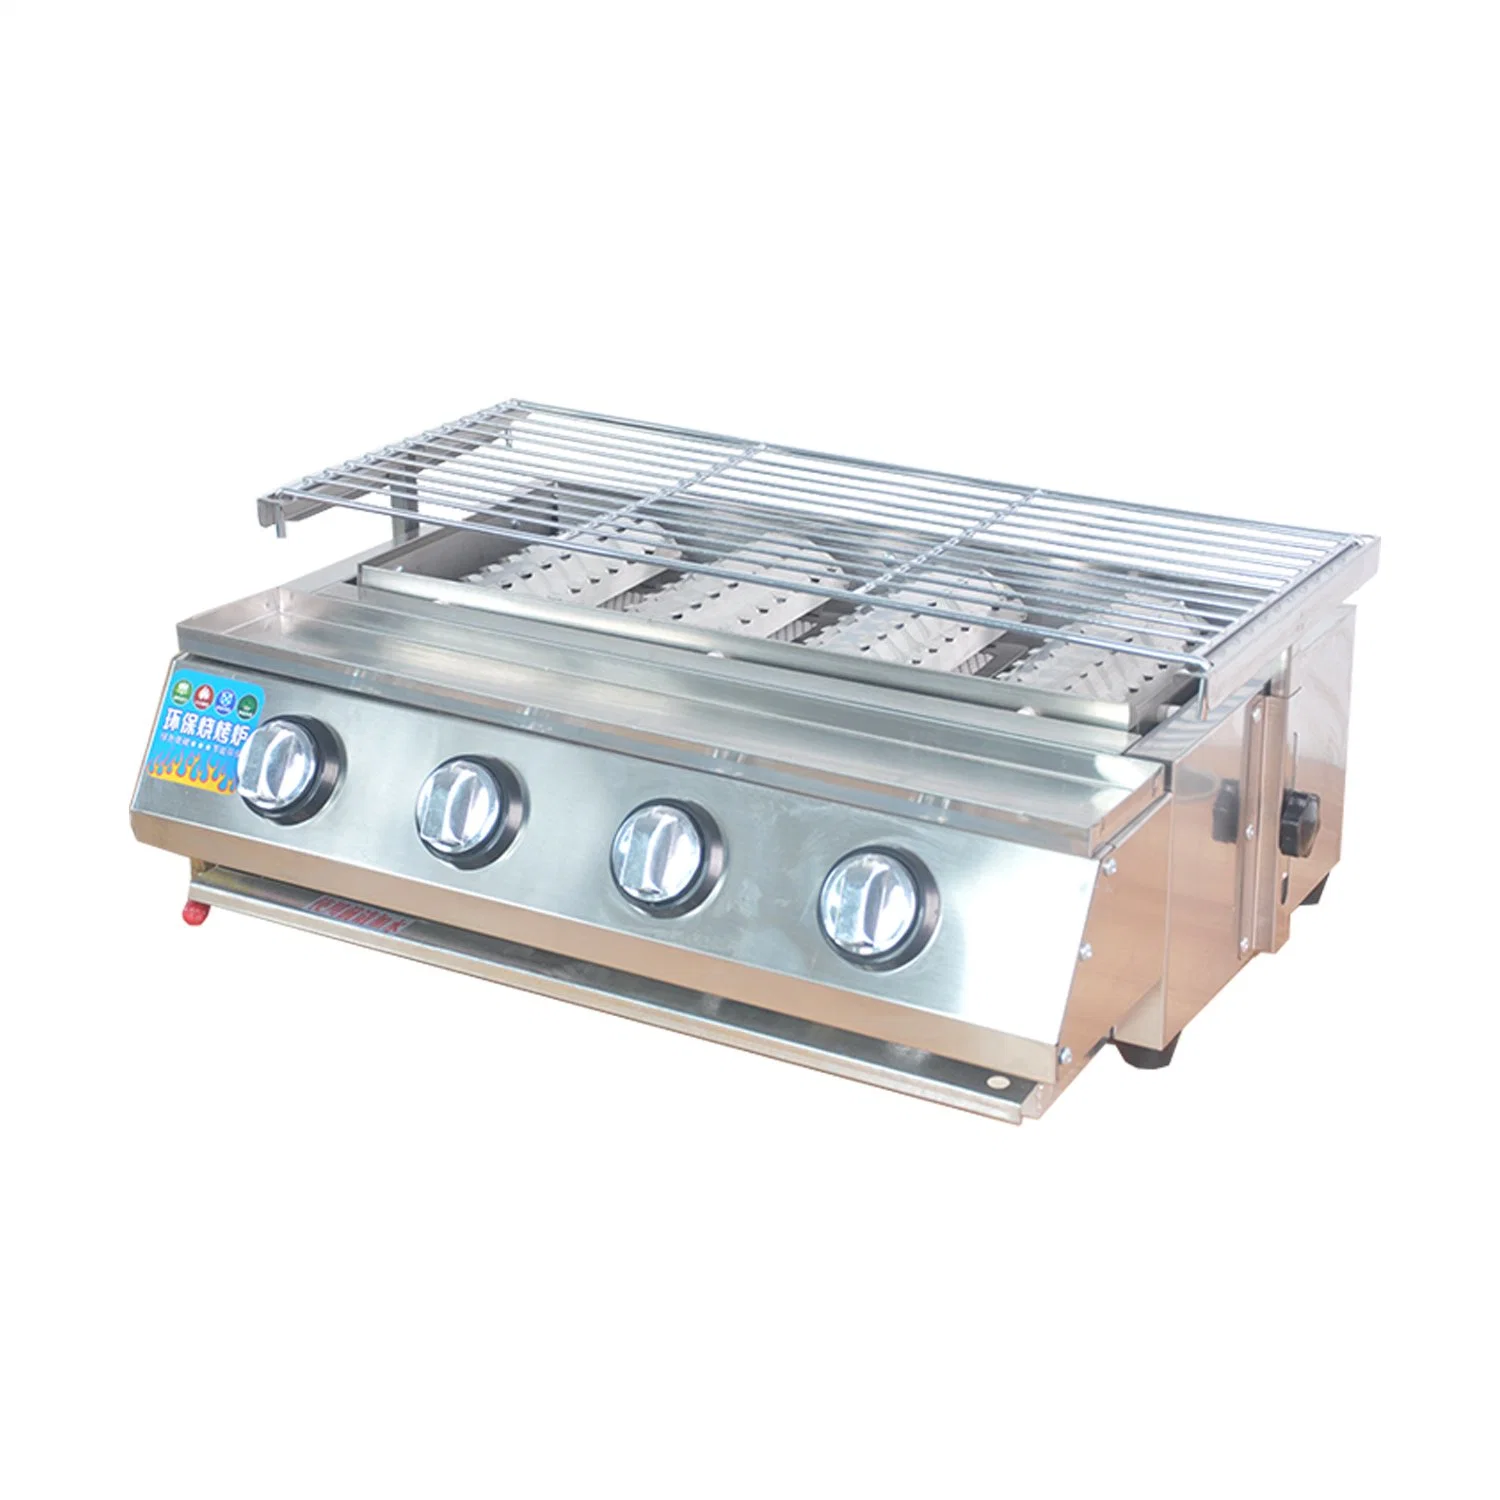 Catering Equipment Temperature Control Professional Commercial Portable Gas BBQ Grill